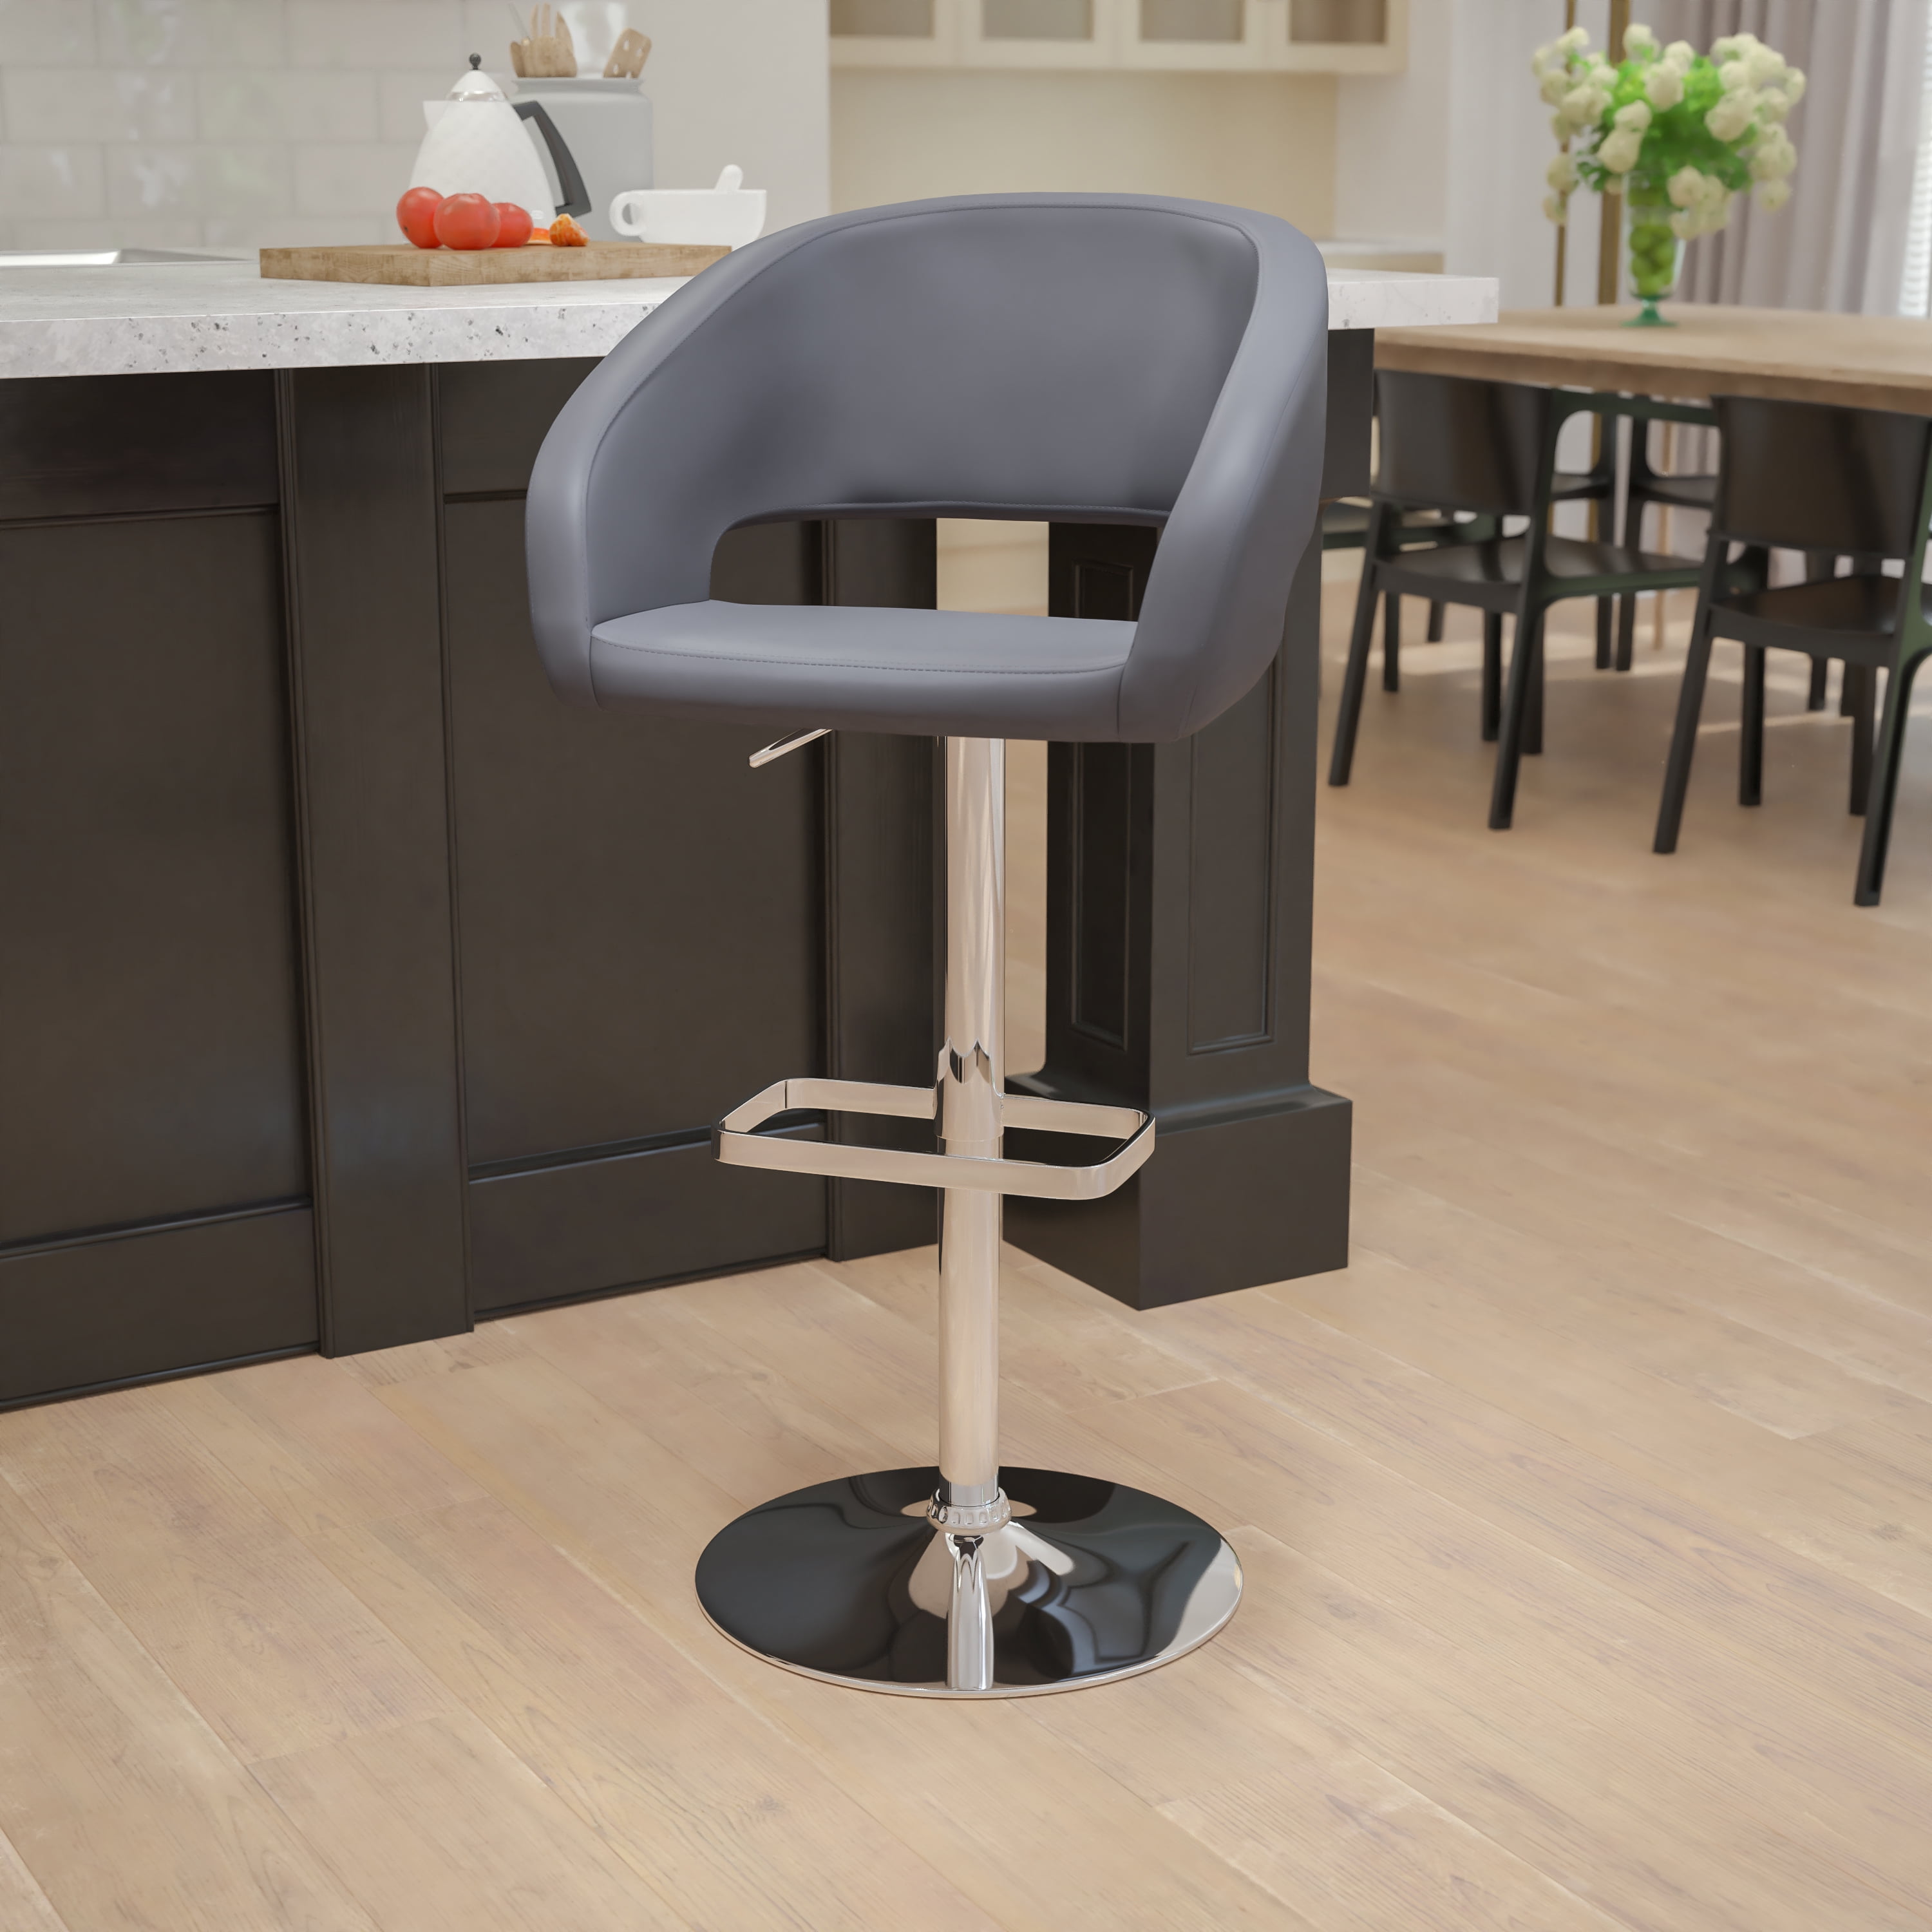 Buy YOUNIKE Bar Stools Counter Height Barstools, Ergonomic High PP Bar Stool ,Adjustable Swivel Hydraulic Island Bar Chairs with Back, Kitchen and Home  Online in TurkeyB08TBDBYB3